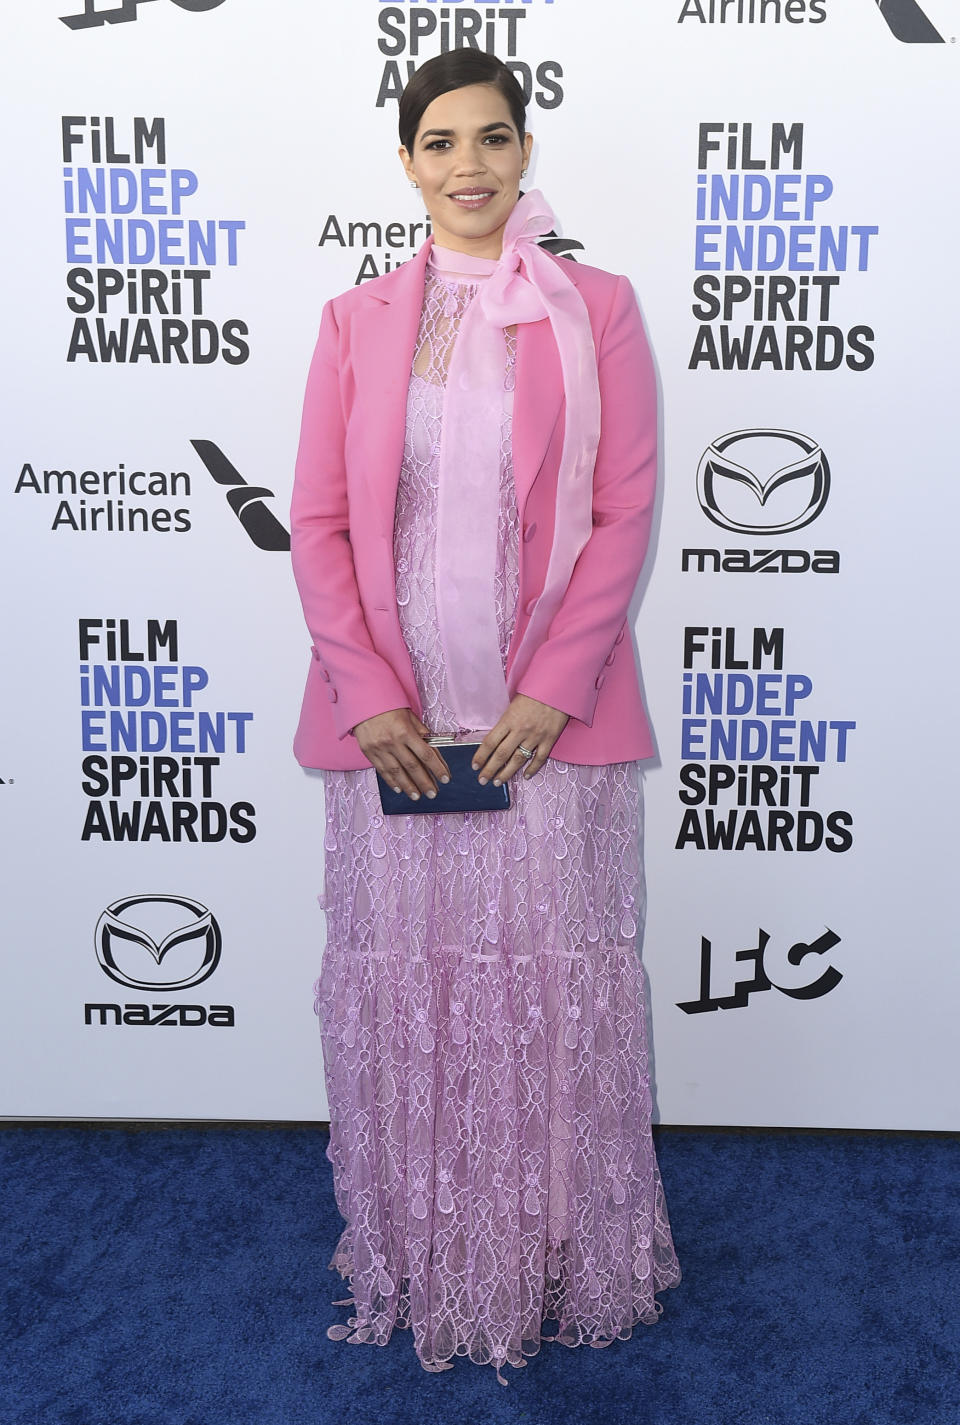 FILE - America Ferrera arrives at the 35th Film Independent Spirit Awards on Saturday, Feb. 8, 2020, in Santa Monica, Calif. Ferrera turns 39 on April 18. (Photo by Jordan Strauss/Invision/AP, File)